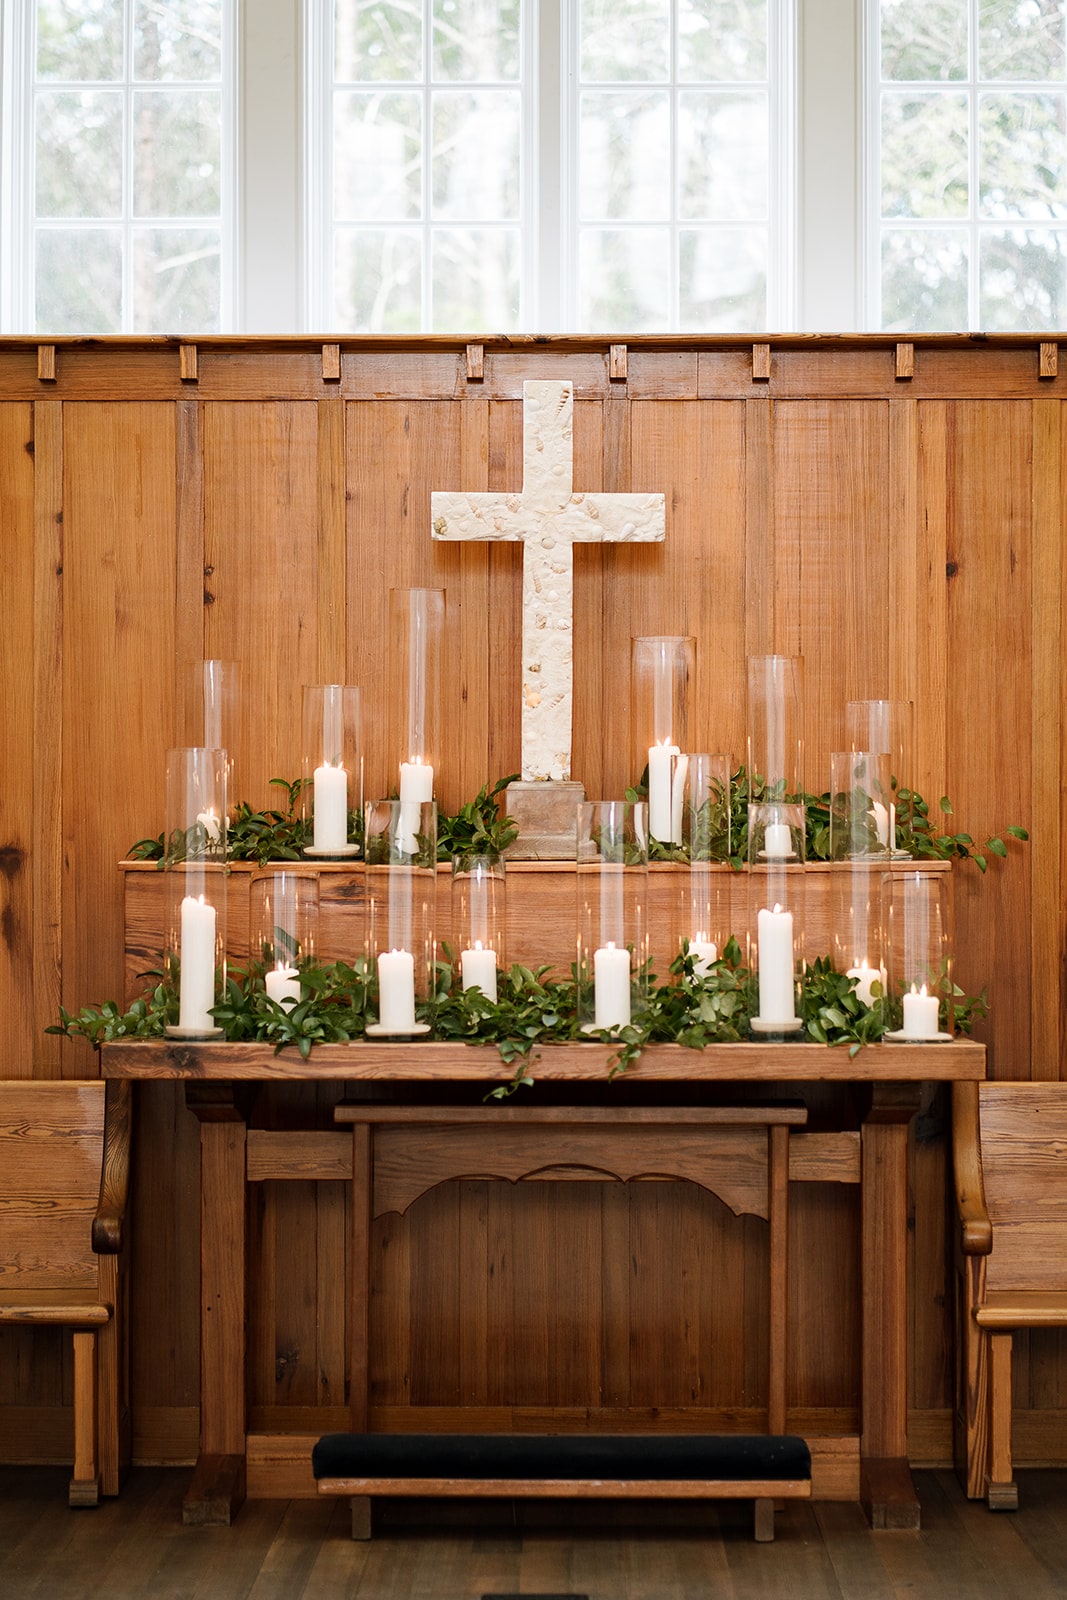 Church decor with candles and greenery